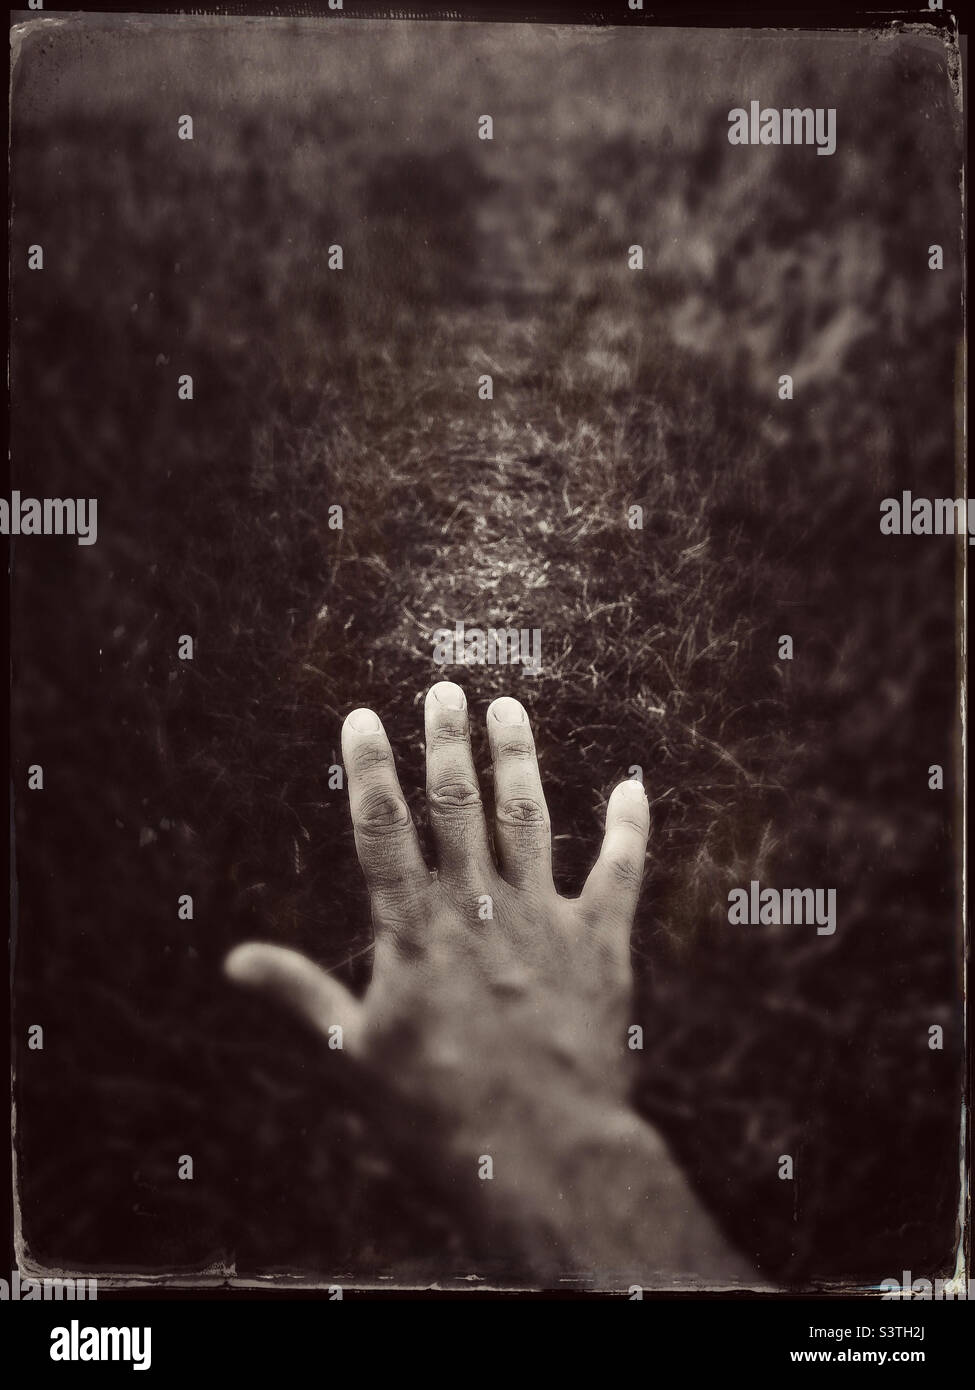 Image of a hand against a field. Edited to give it a vintage tintype photo look Stock Photo